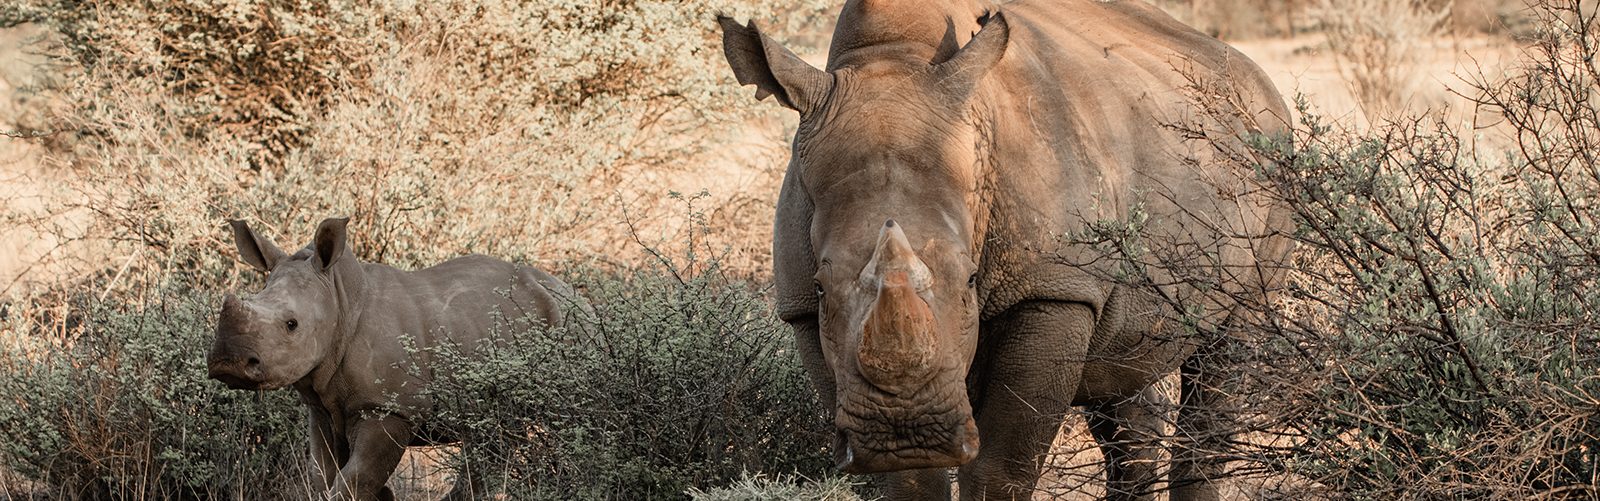 At the rhino sanctuary in Namibia, you can assist in saving the white rhinos.